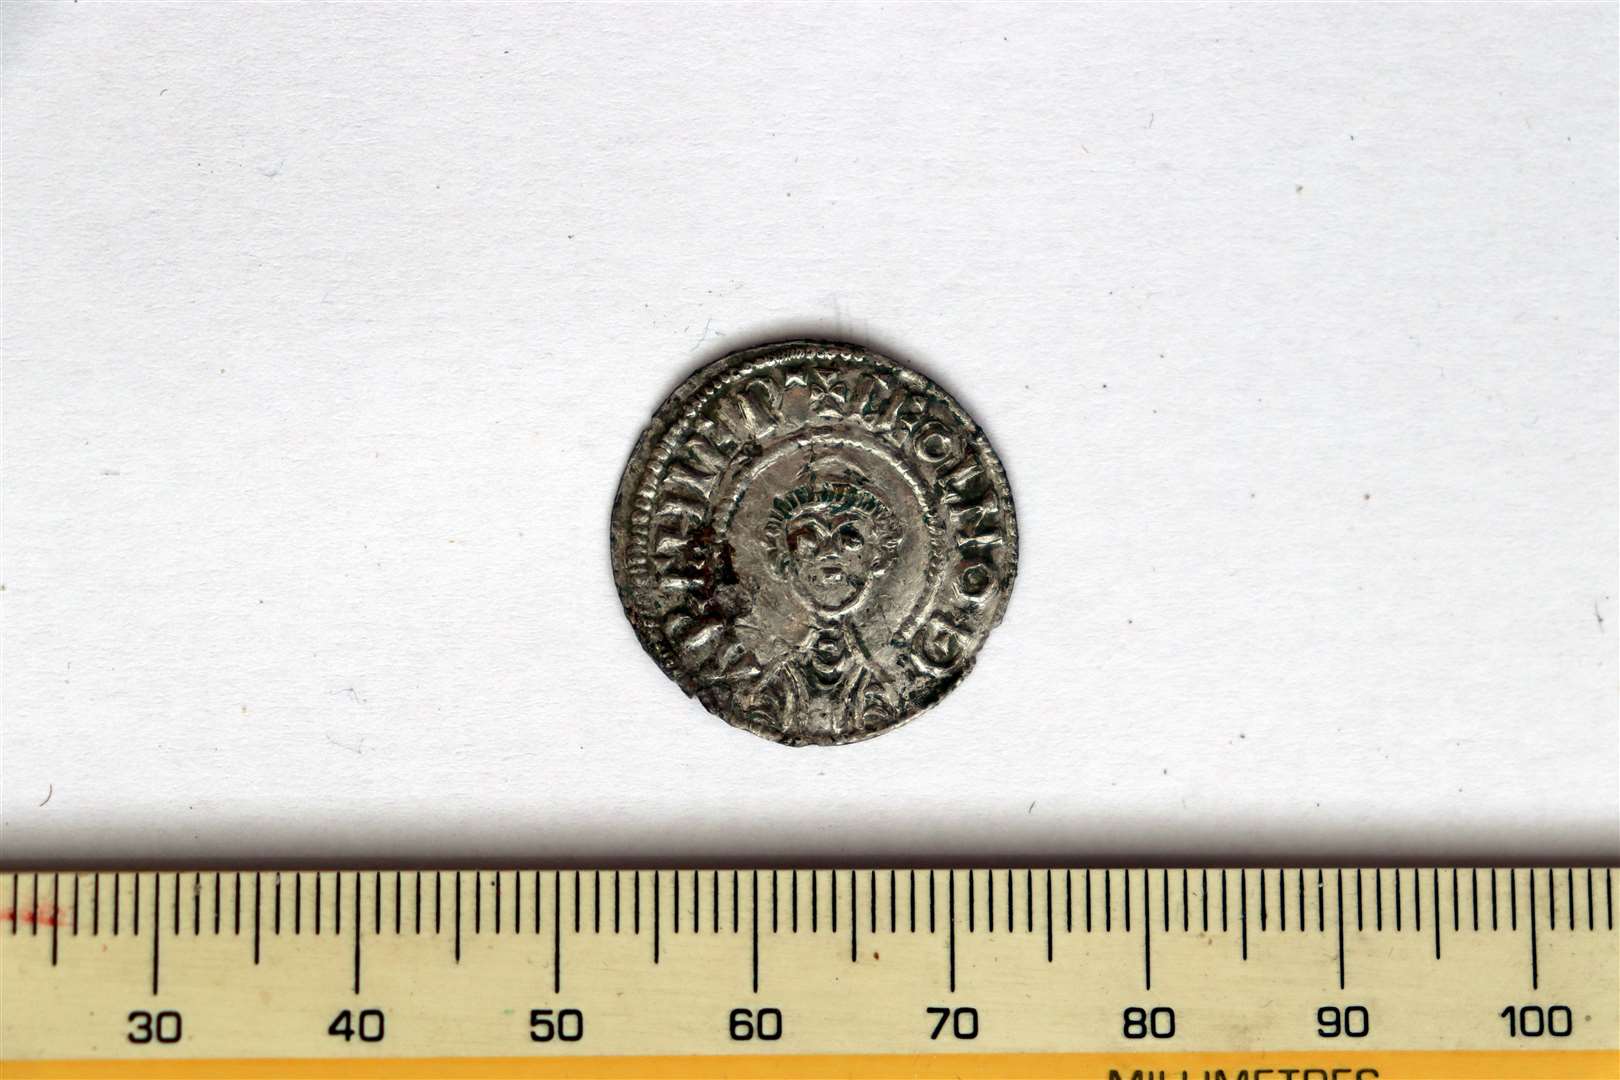 Dateable artefacts such as silver coins were discovered at the site. Picture: Dr Gabor Thomas